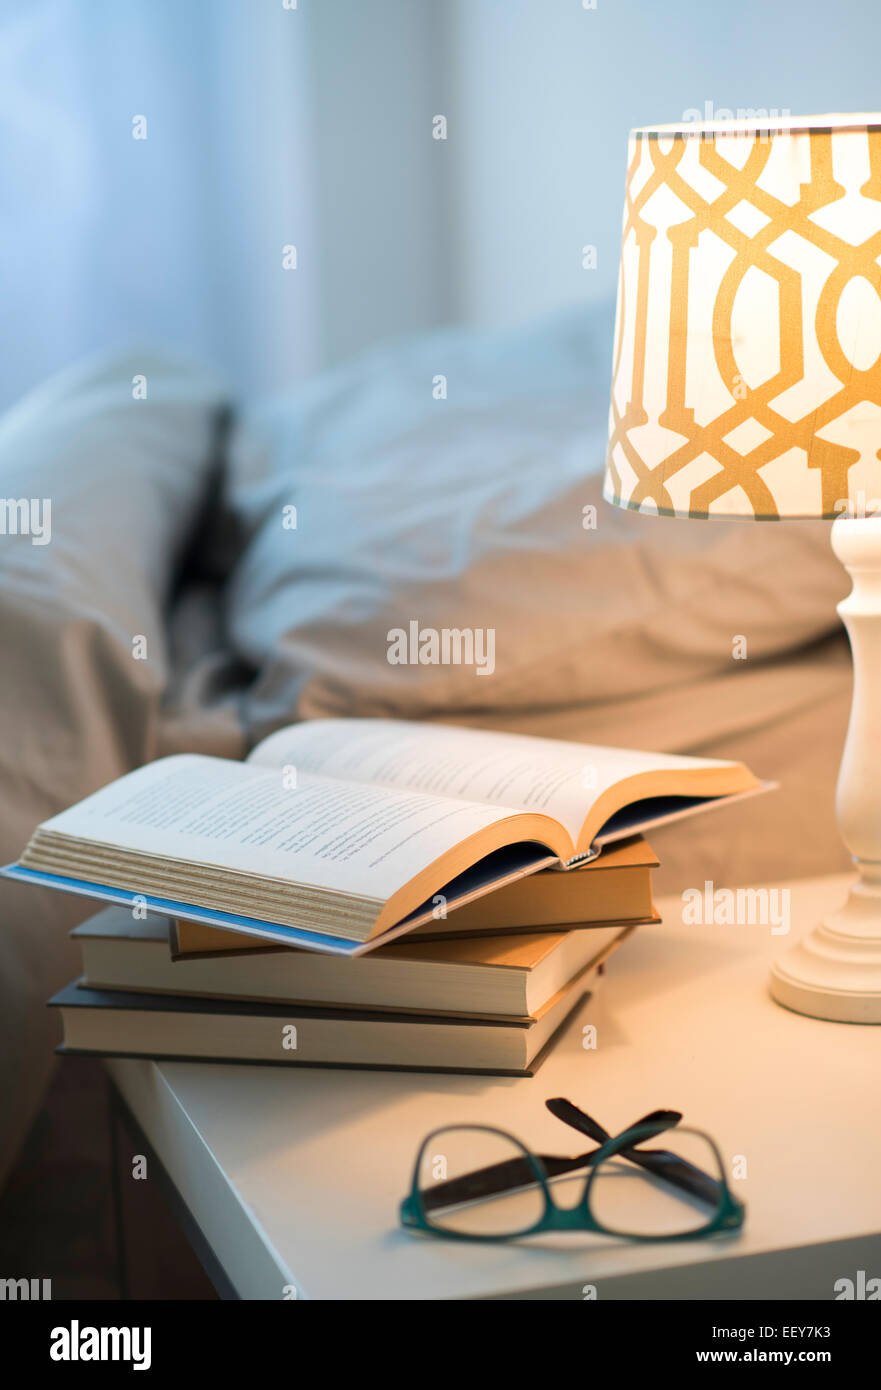 Bed with lamp, books and glasses on bedside table Stock Photo